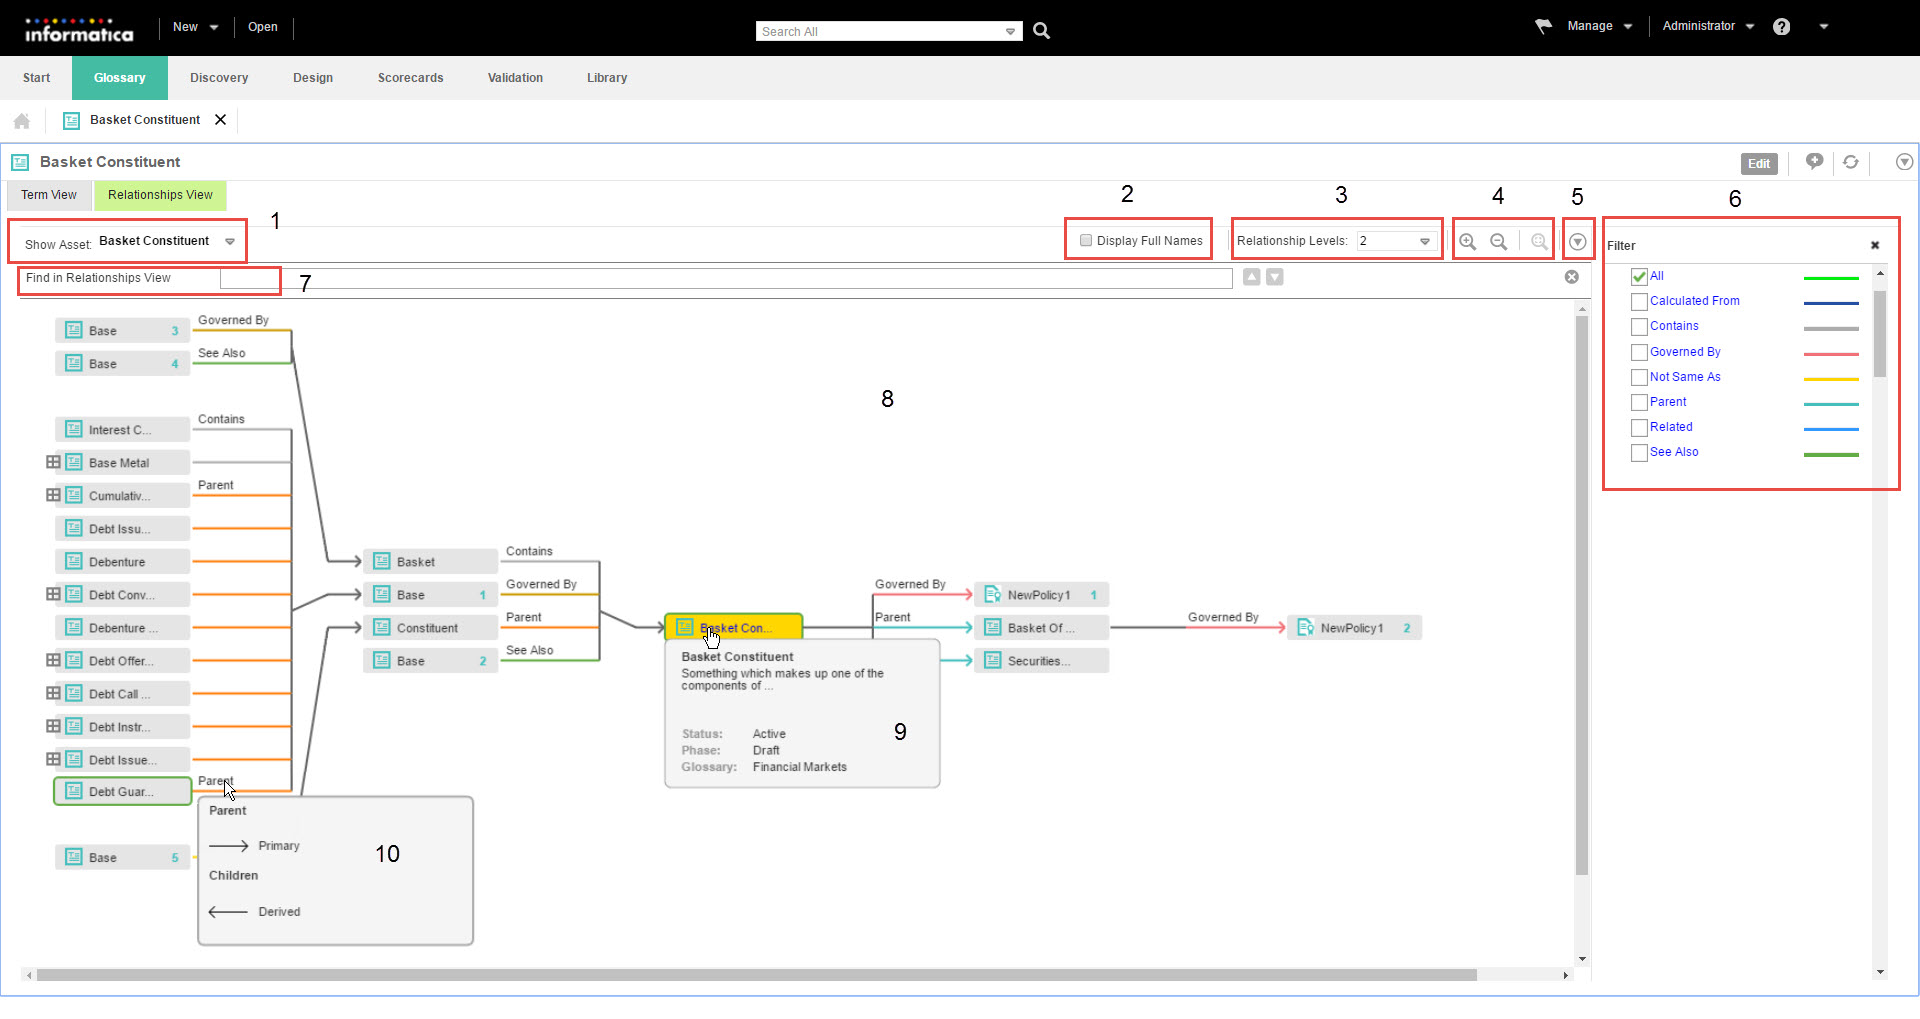 Relationship view diagram in the Glossary workspace showing sections where you can change view level, zoom in or zoom out of areas, filter assets, and interact with the assets to view details. 
		